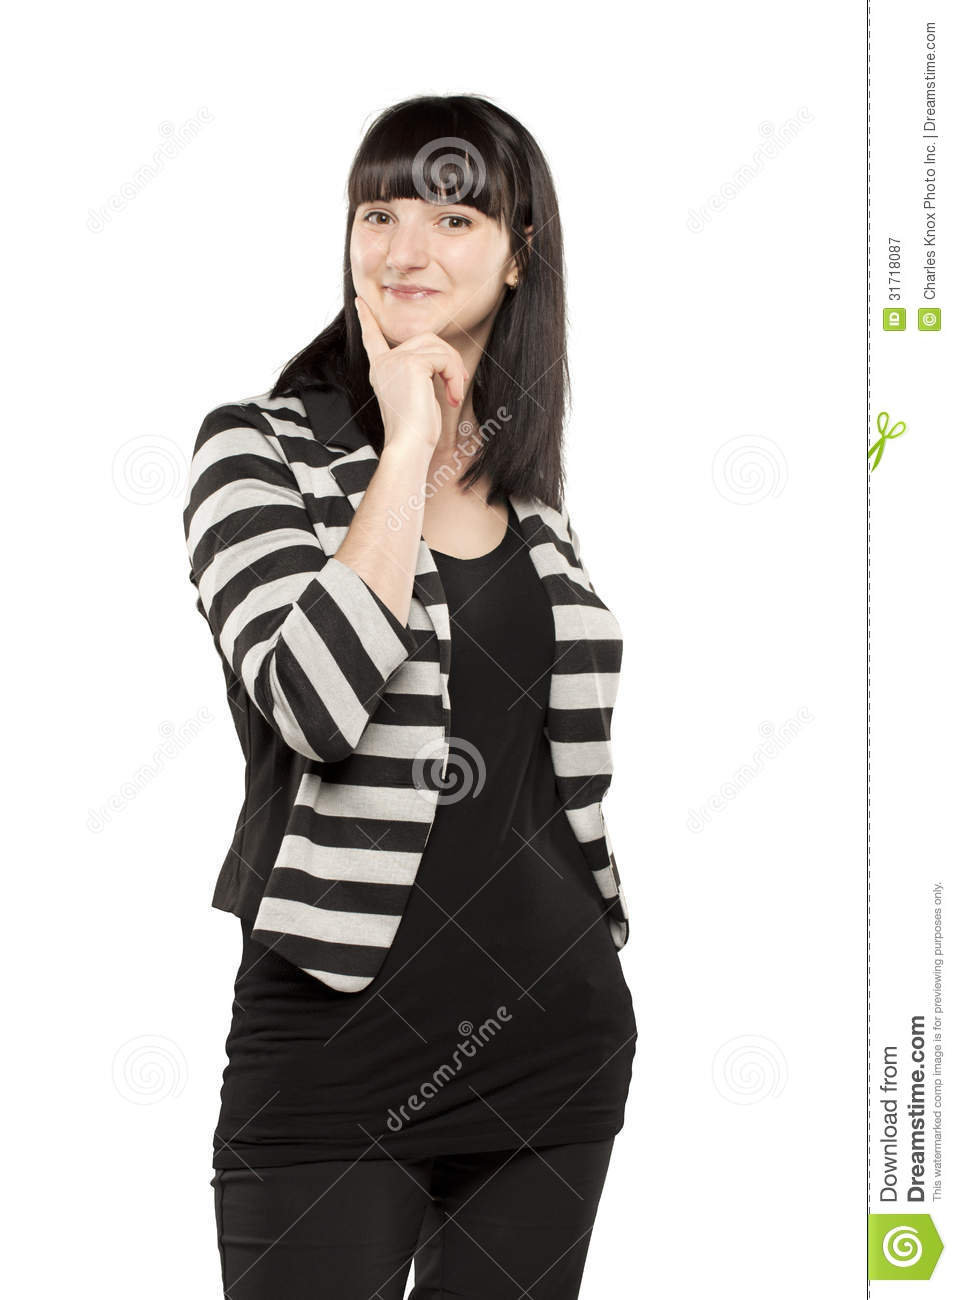 Young Woman In Professional Attire Royalty Free Stock Photography